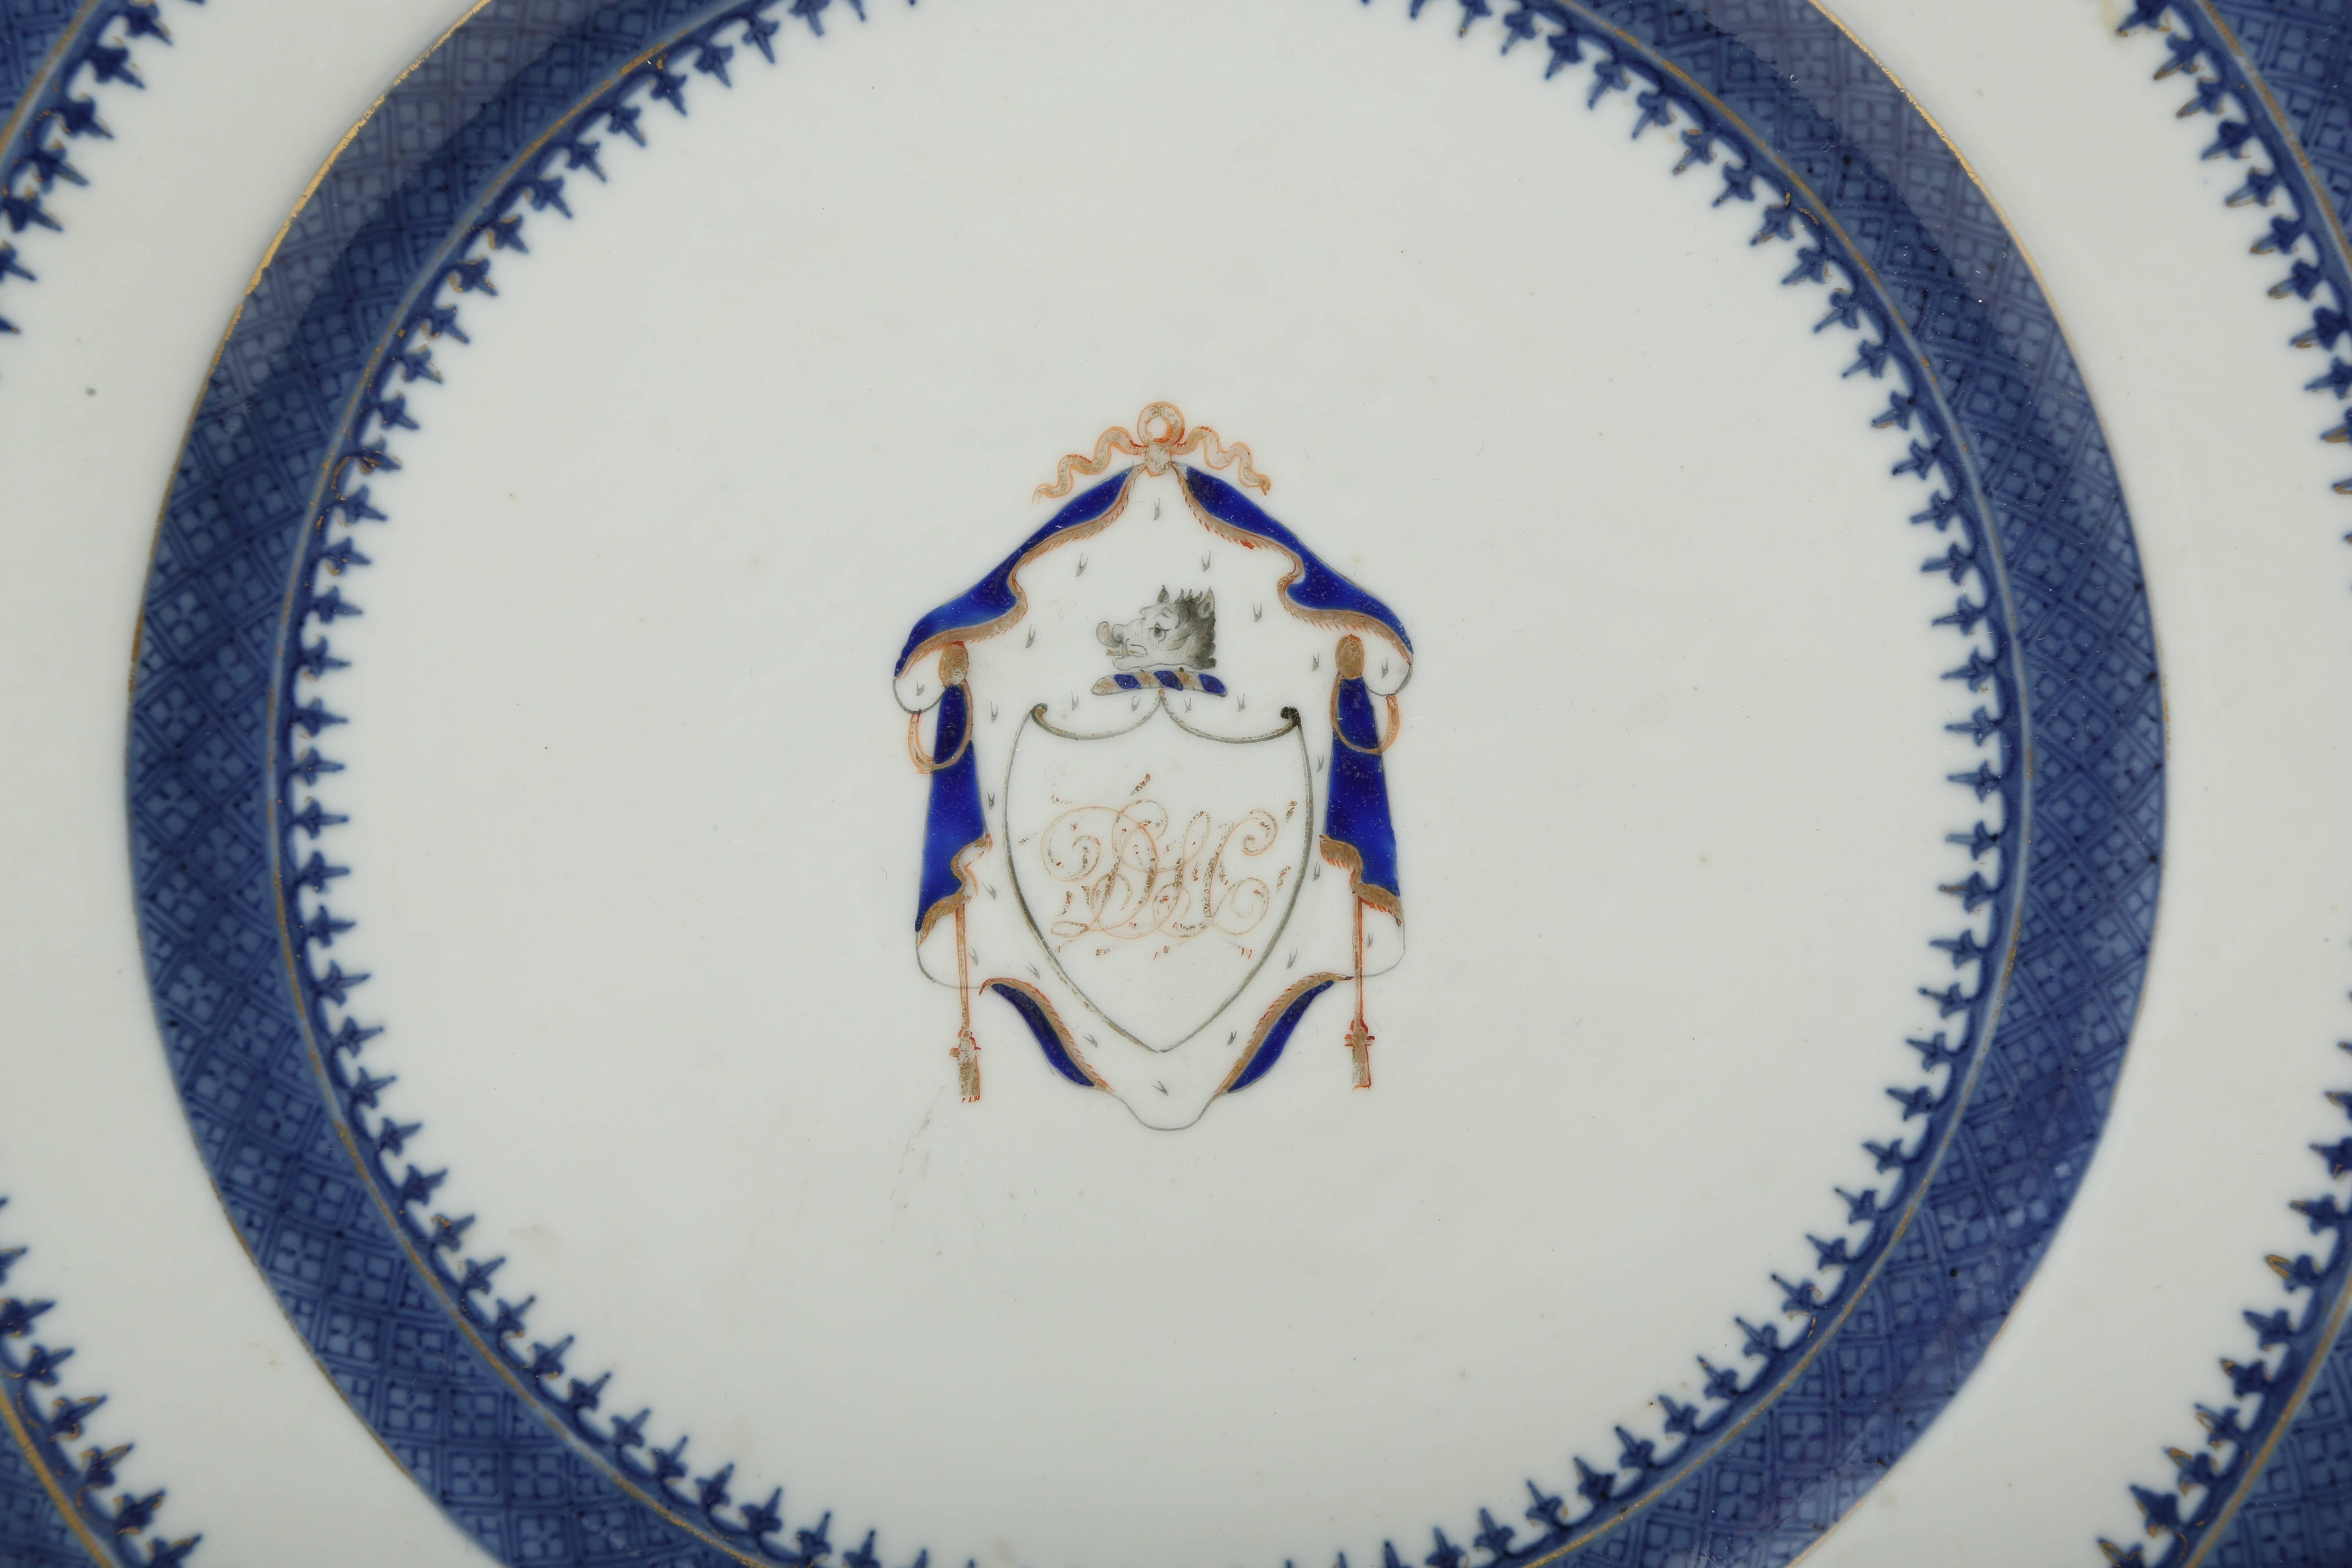 Chinese export porcelain armorial plate hand decorated in underglaze blue and overpainted with cobalt blue and gold enamel.  In the central well there is the crest of a shield with the initials D.L.C.  under a boar's head surrounded by swagged